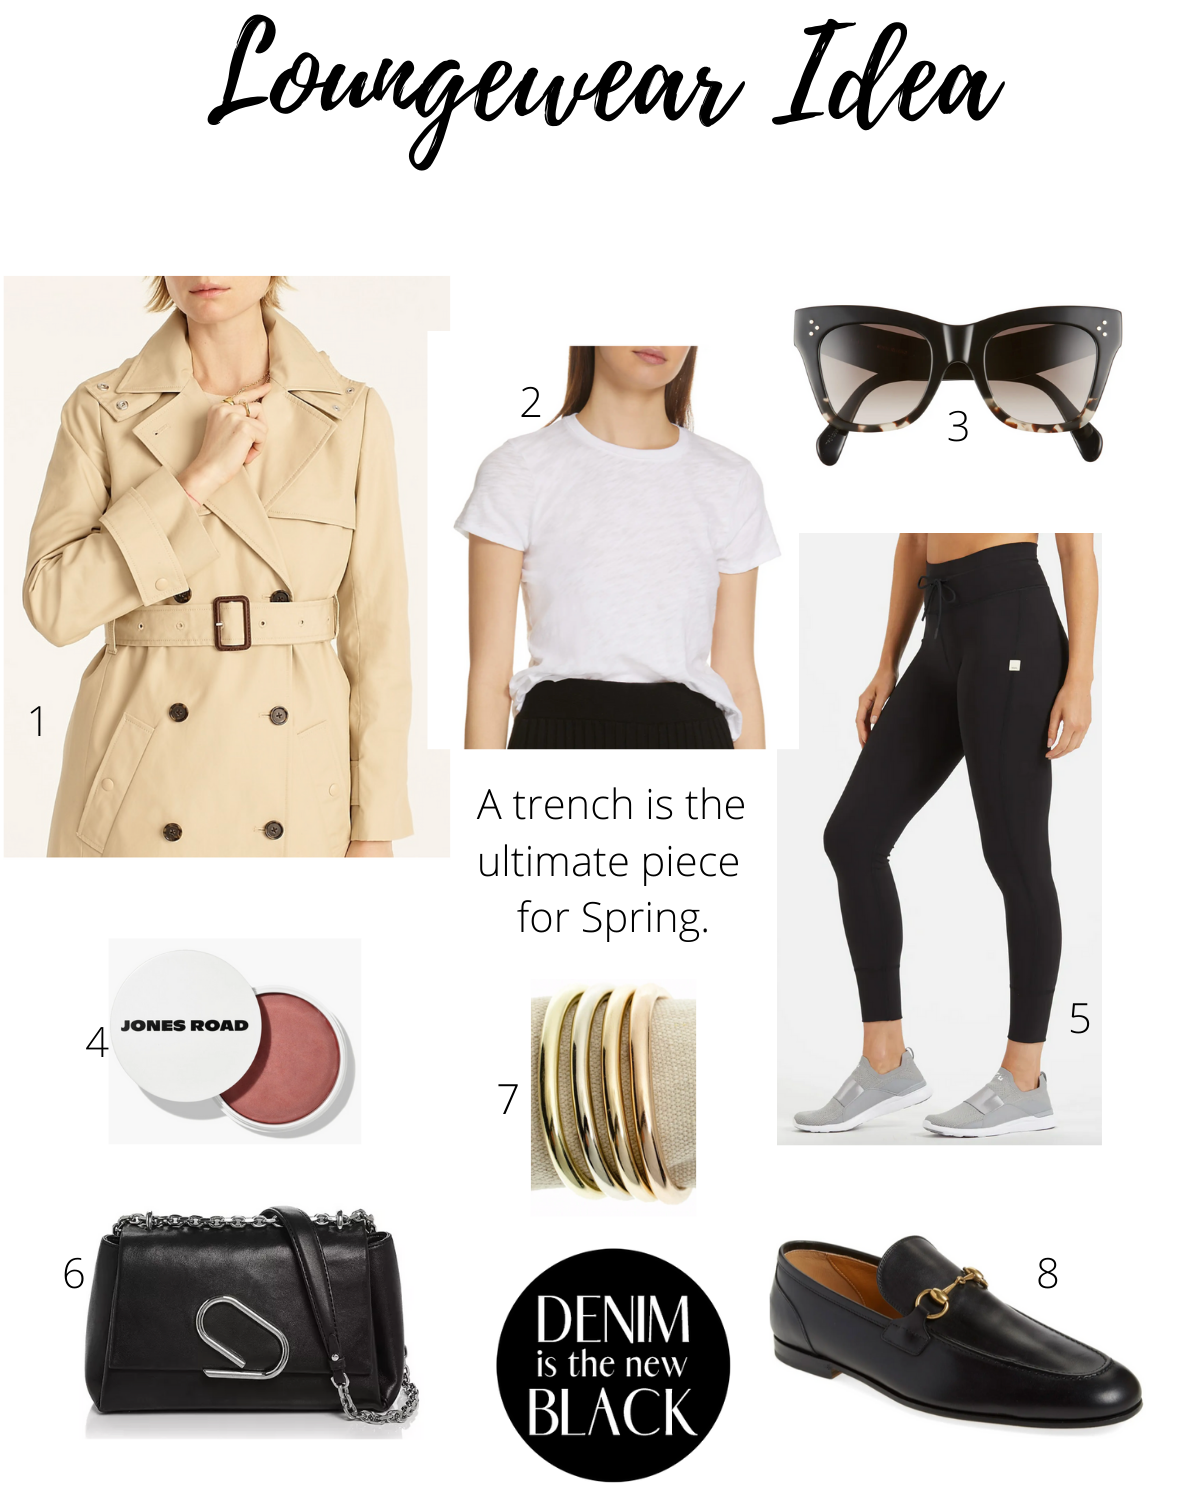 How to look good in loungewear for spring with a trench coat and Gucci Loafers.